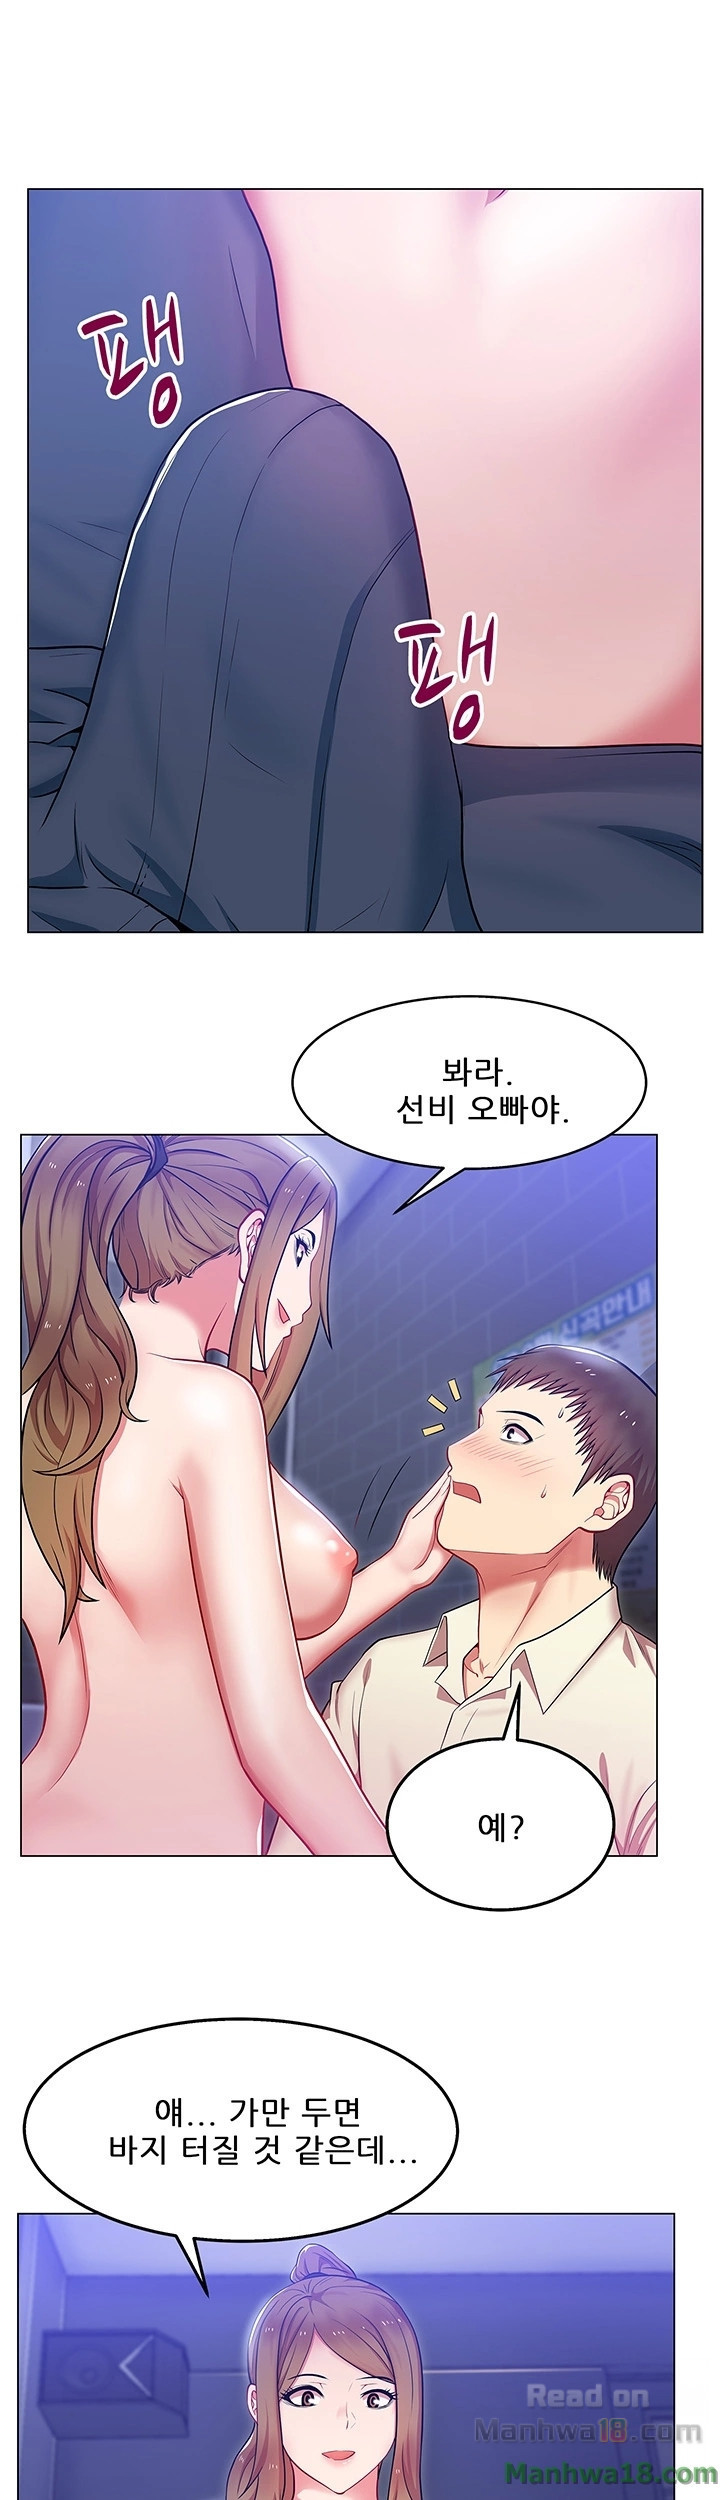 Wifes Friend Raw - Chapter 3 Page 12